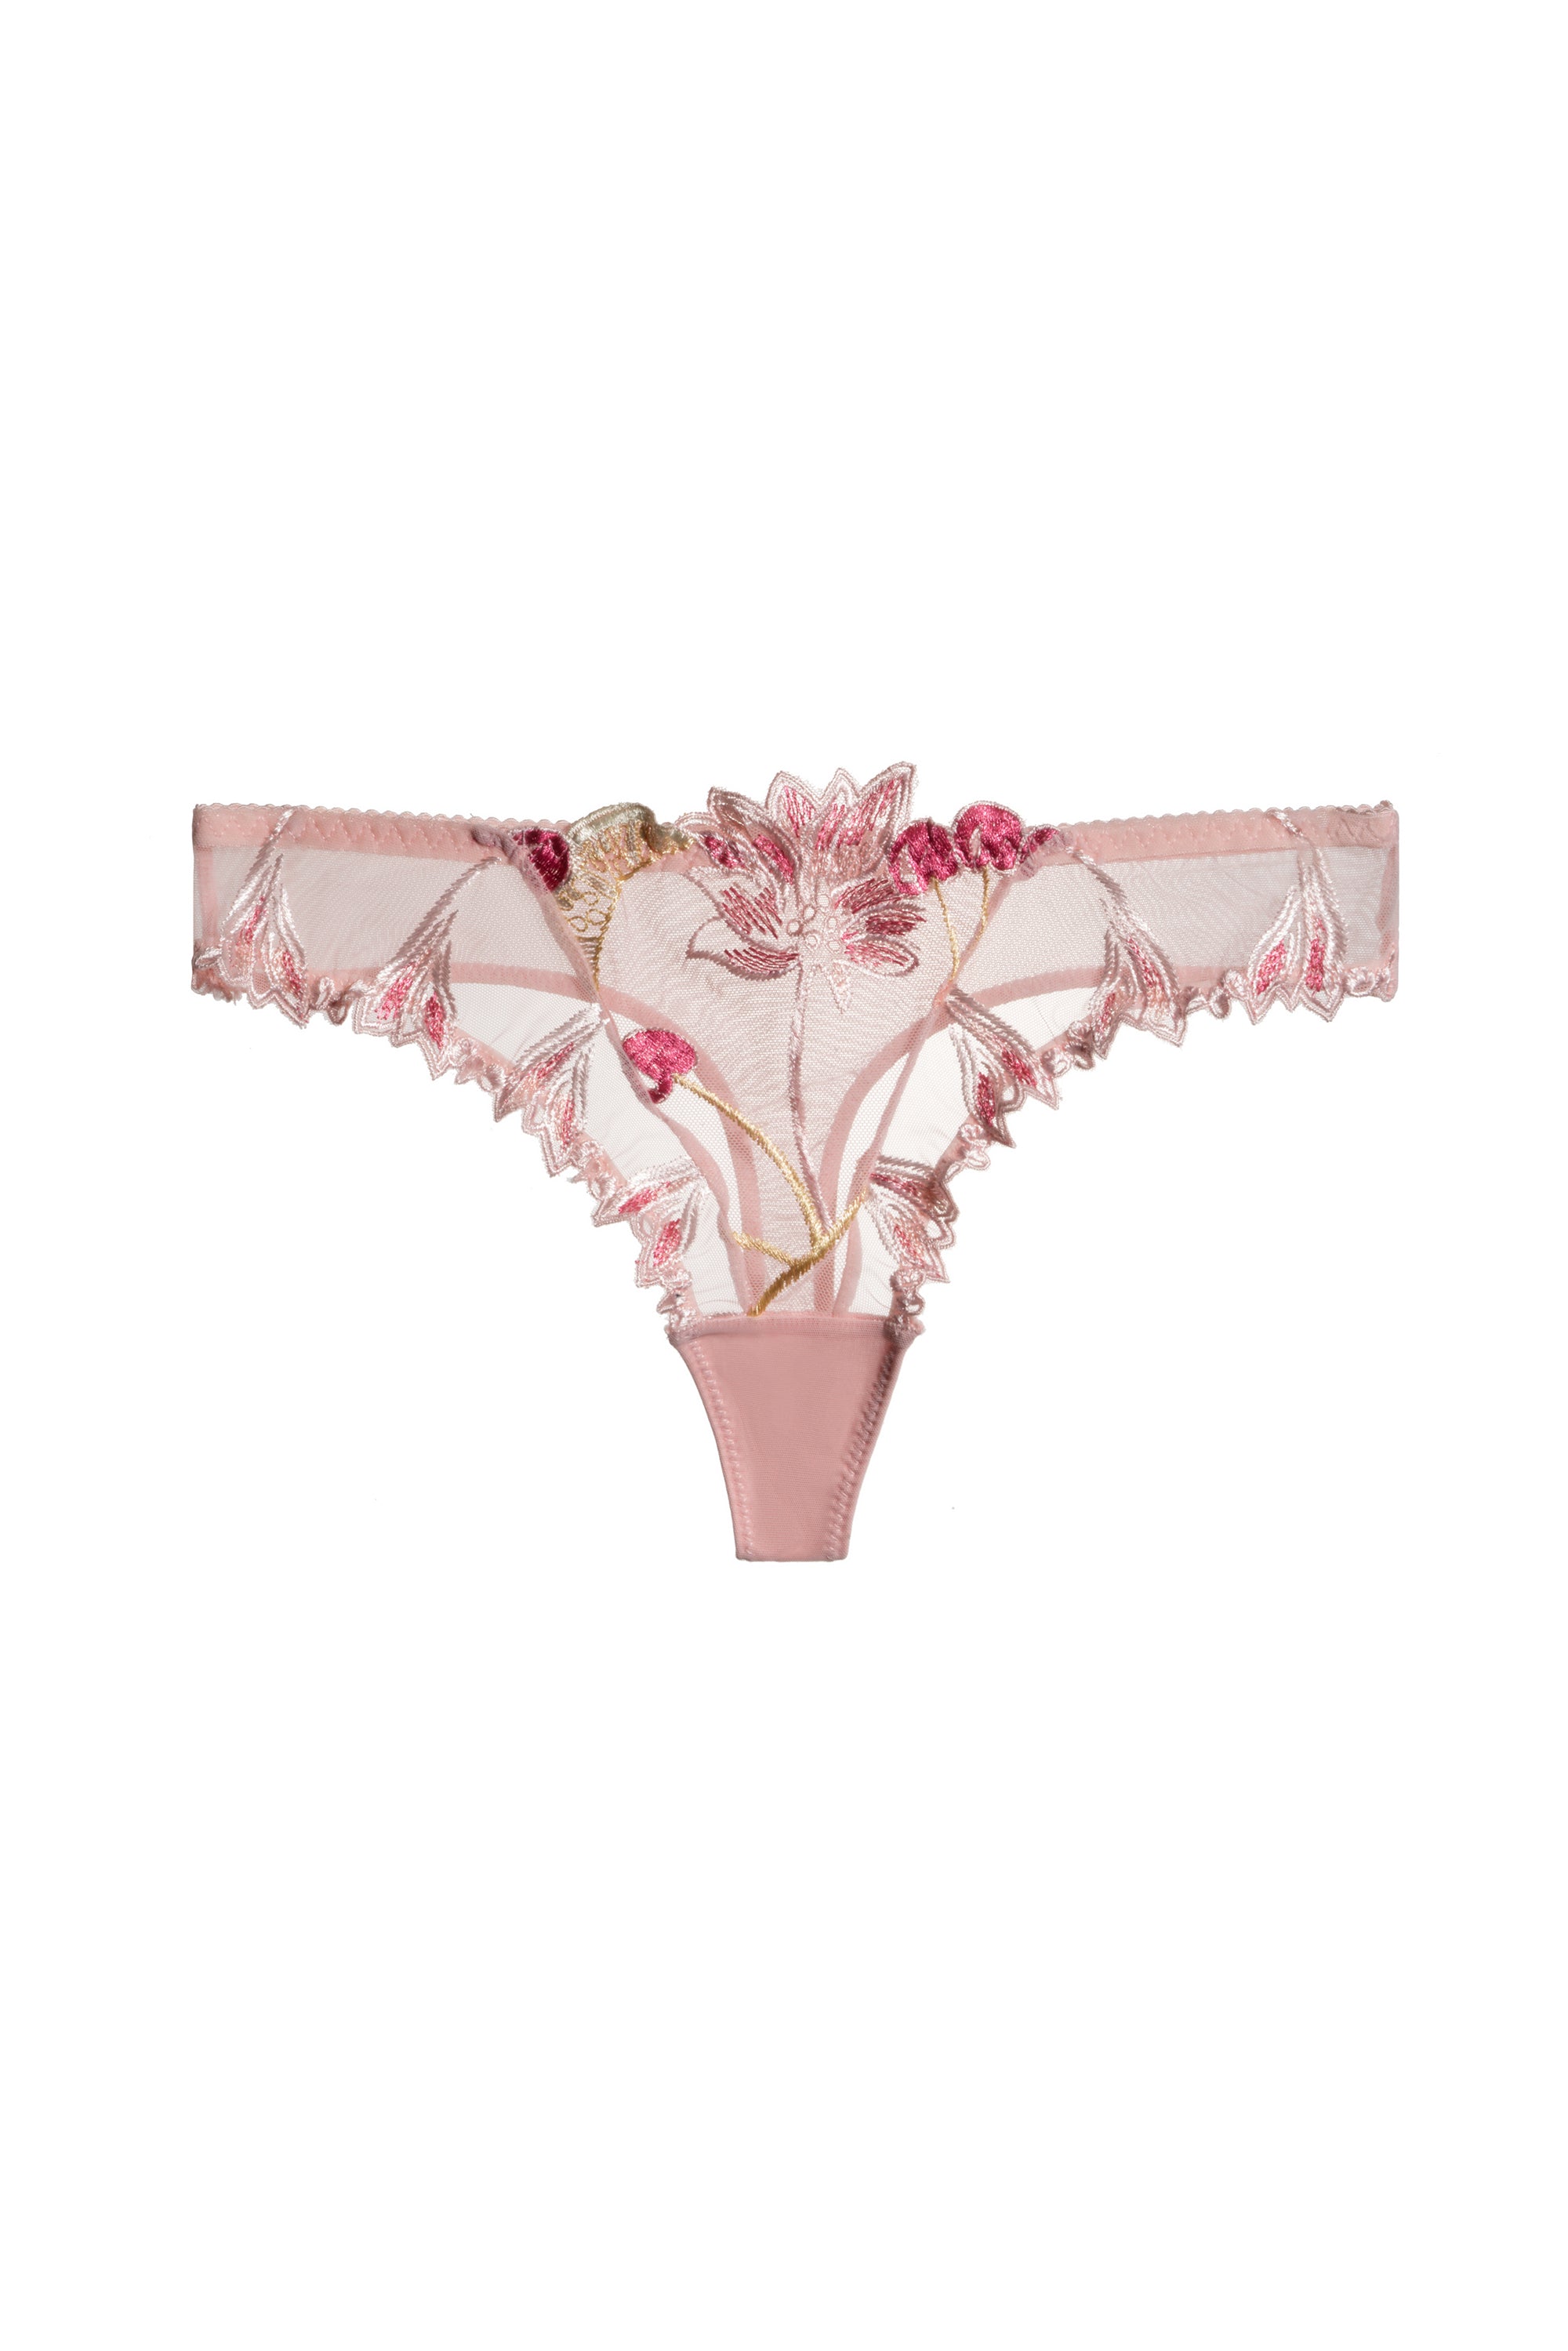 Pink Flower & Cherry Embroidery Mesh Panty Lingerie – Hello.LA.Girl